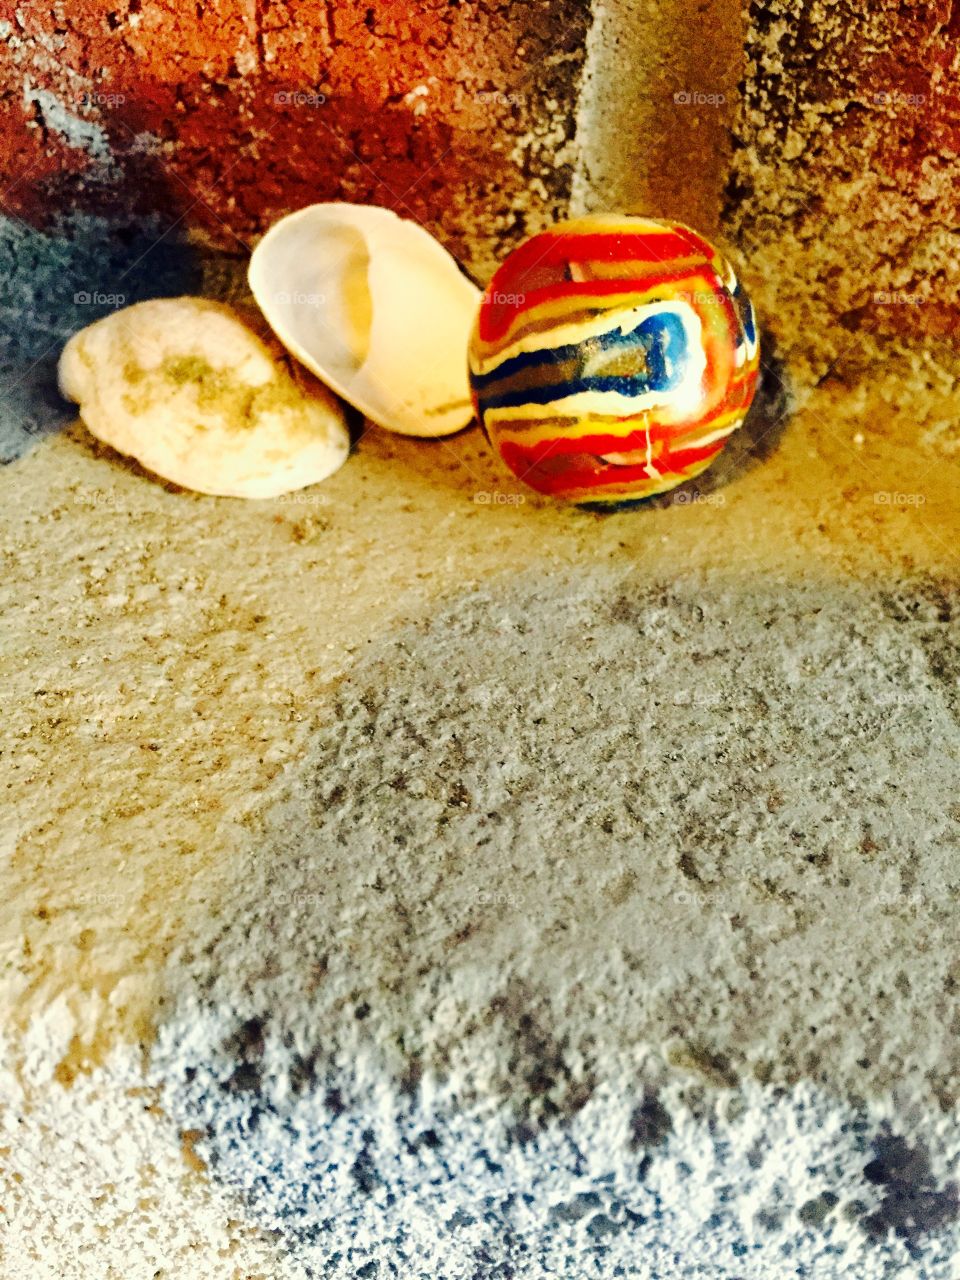 Marbles and shells